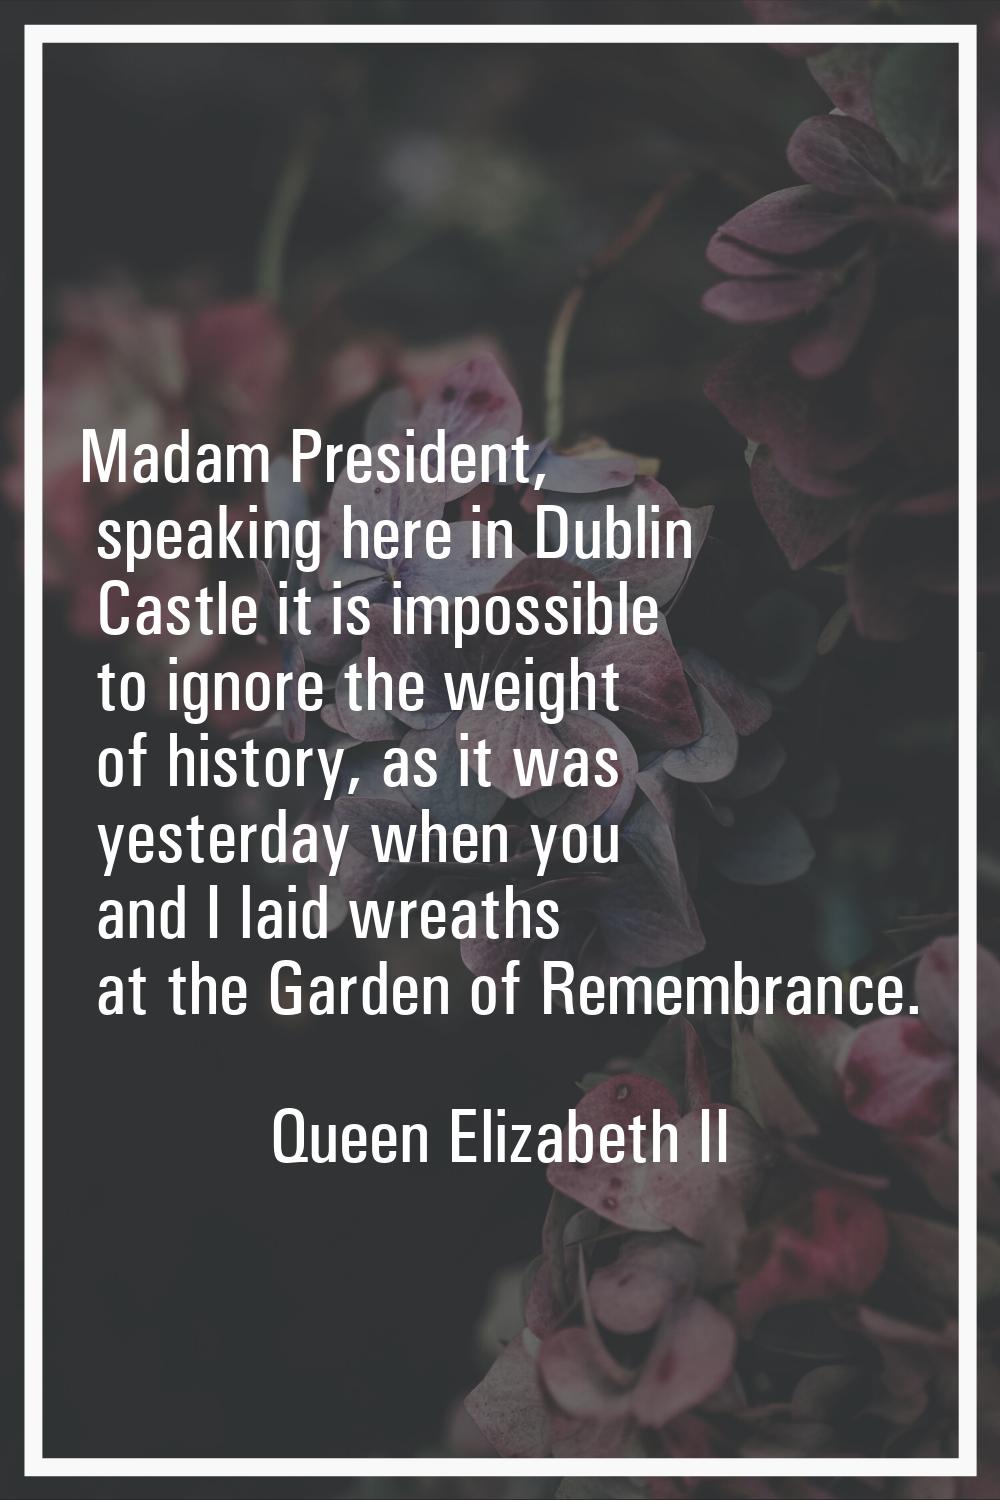 Madam President, speaking here in Dublin Castle it is impossible to ignore the weight of history, a